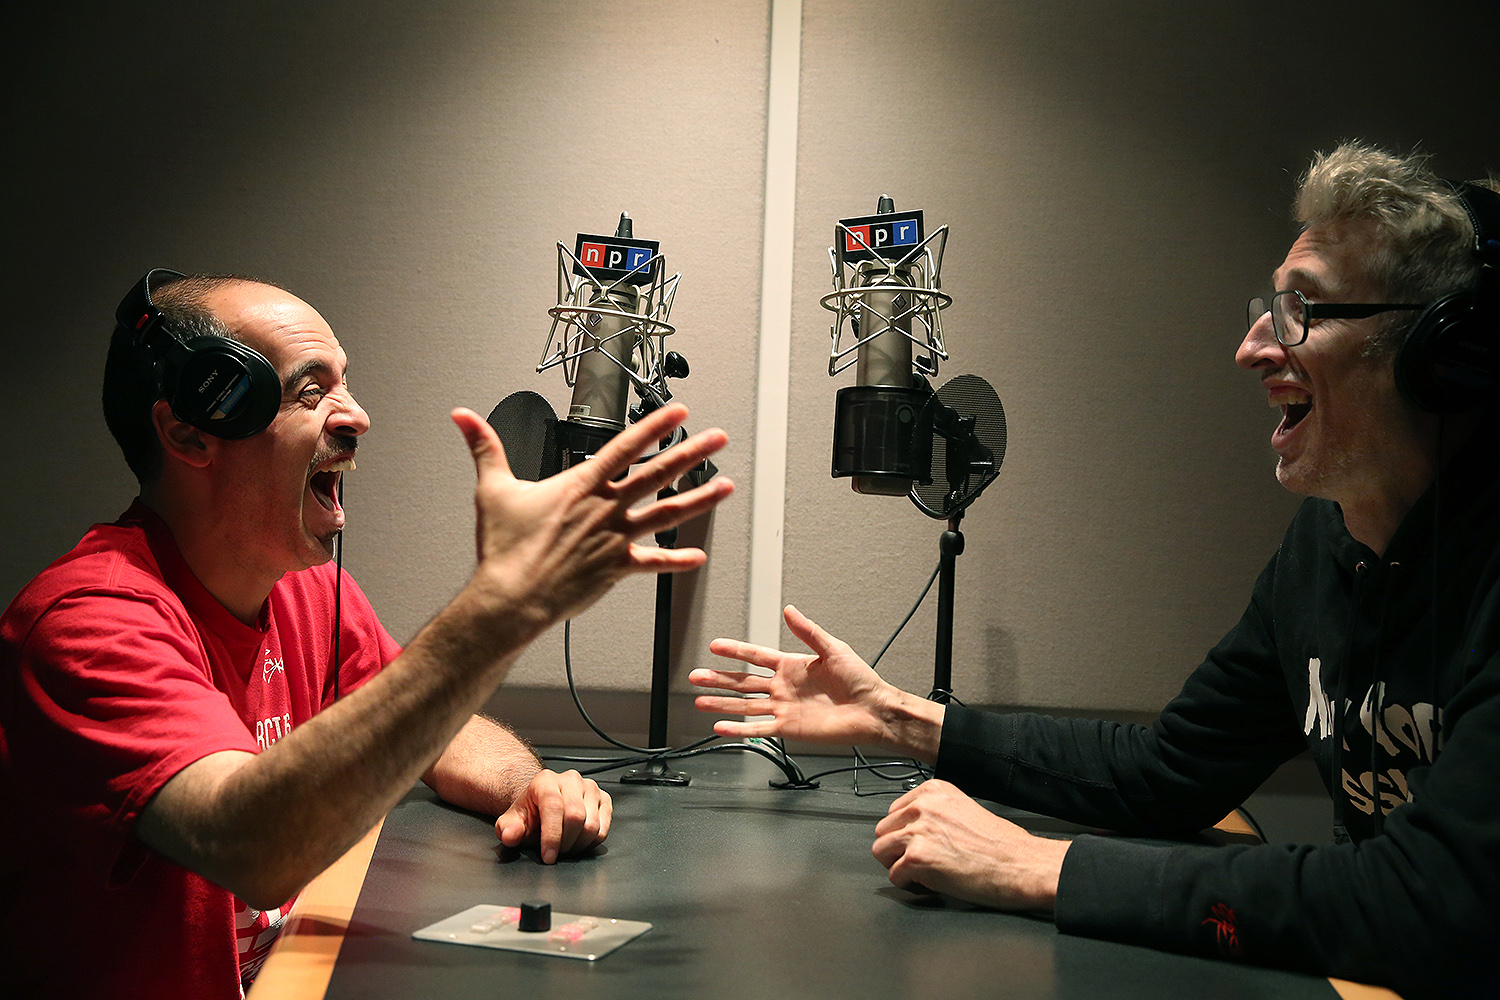 Bobbito Garcia and DJ Stretch Armstrong are in animated discussion and laughter across a studio table on the air at NPR.